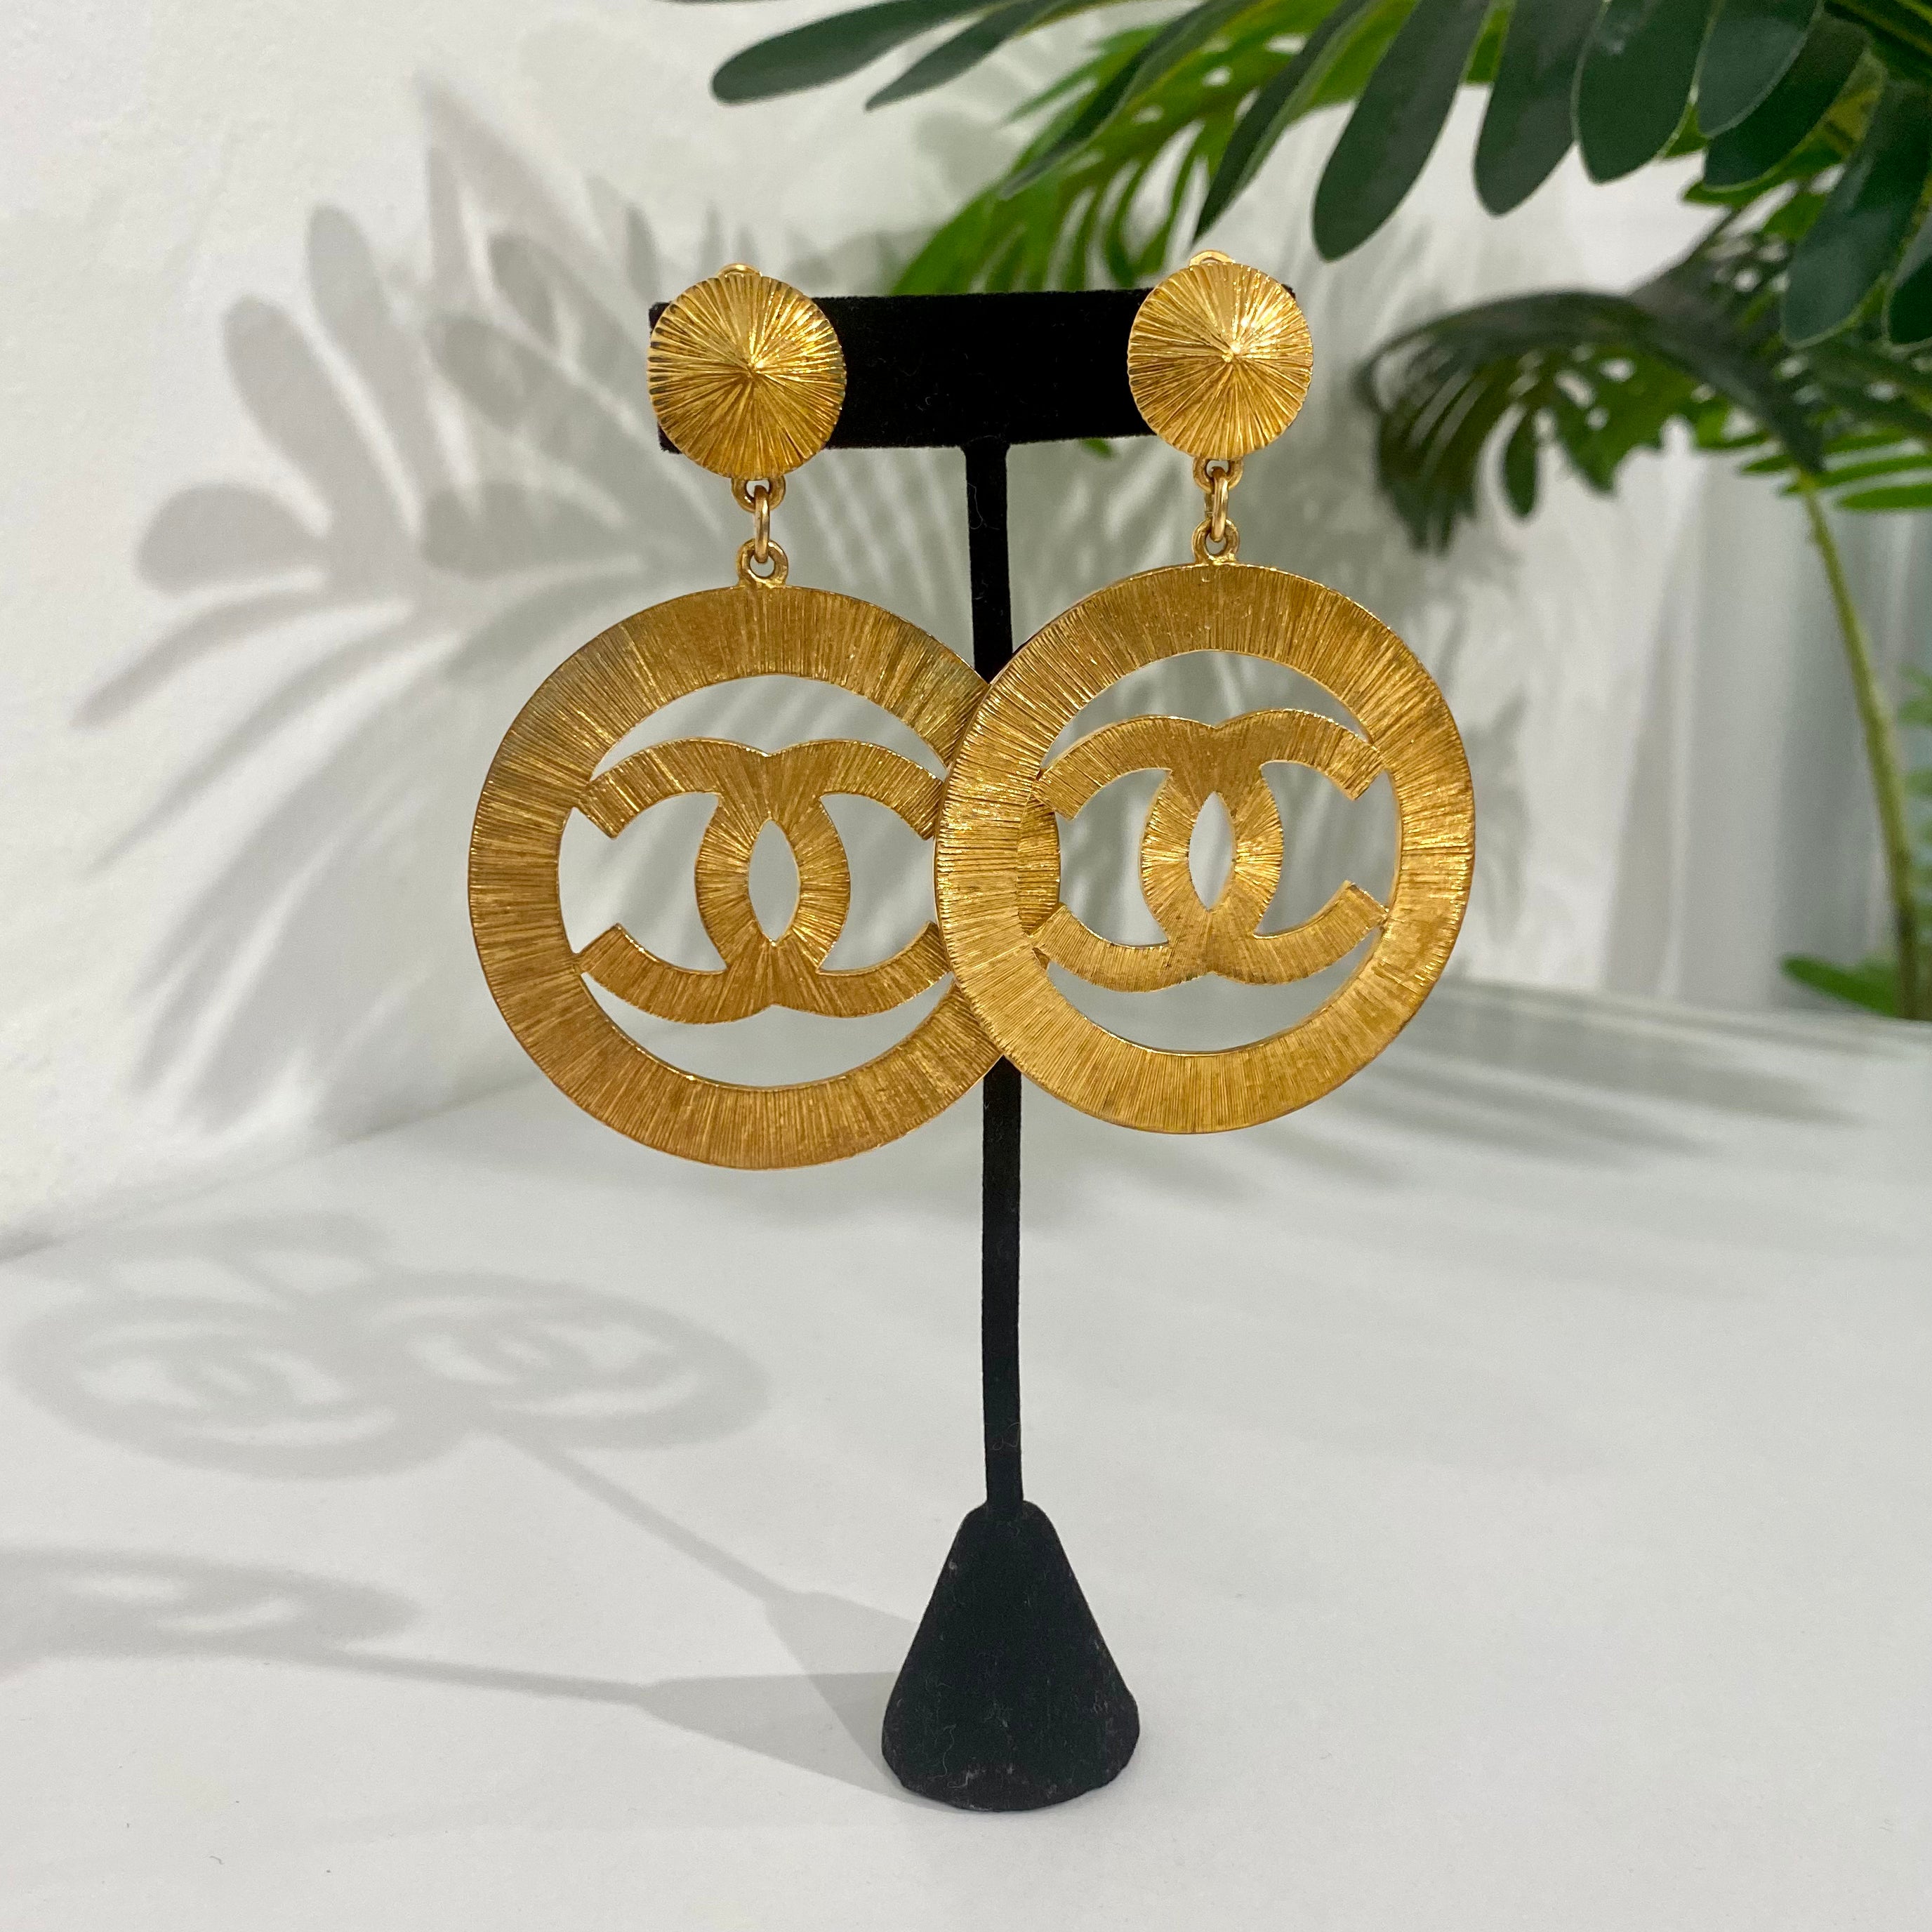 CHANEL VINTAGE METAL QUILTED PARIS BUTTON CC EARRINGS - Hebster